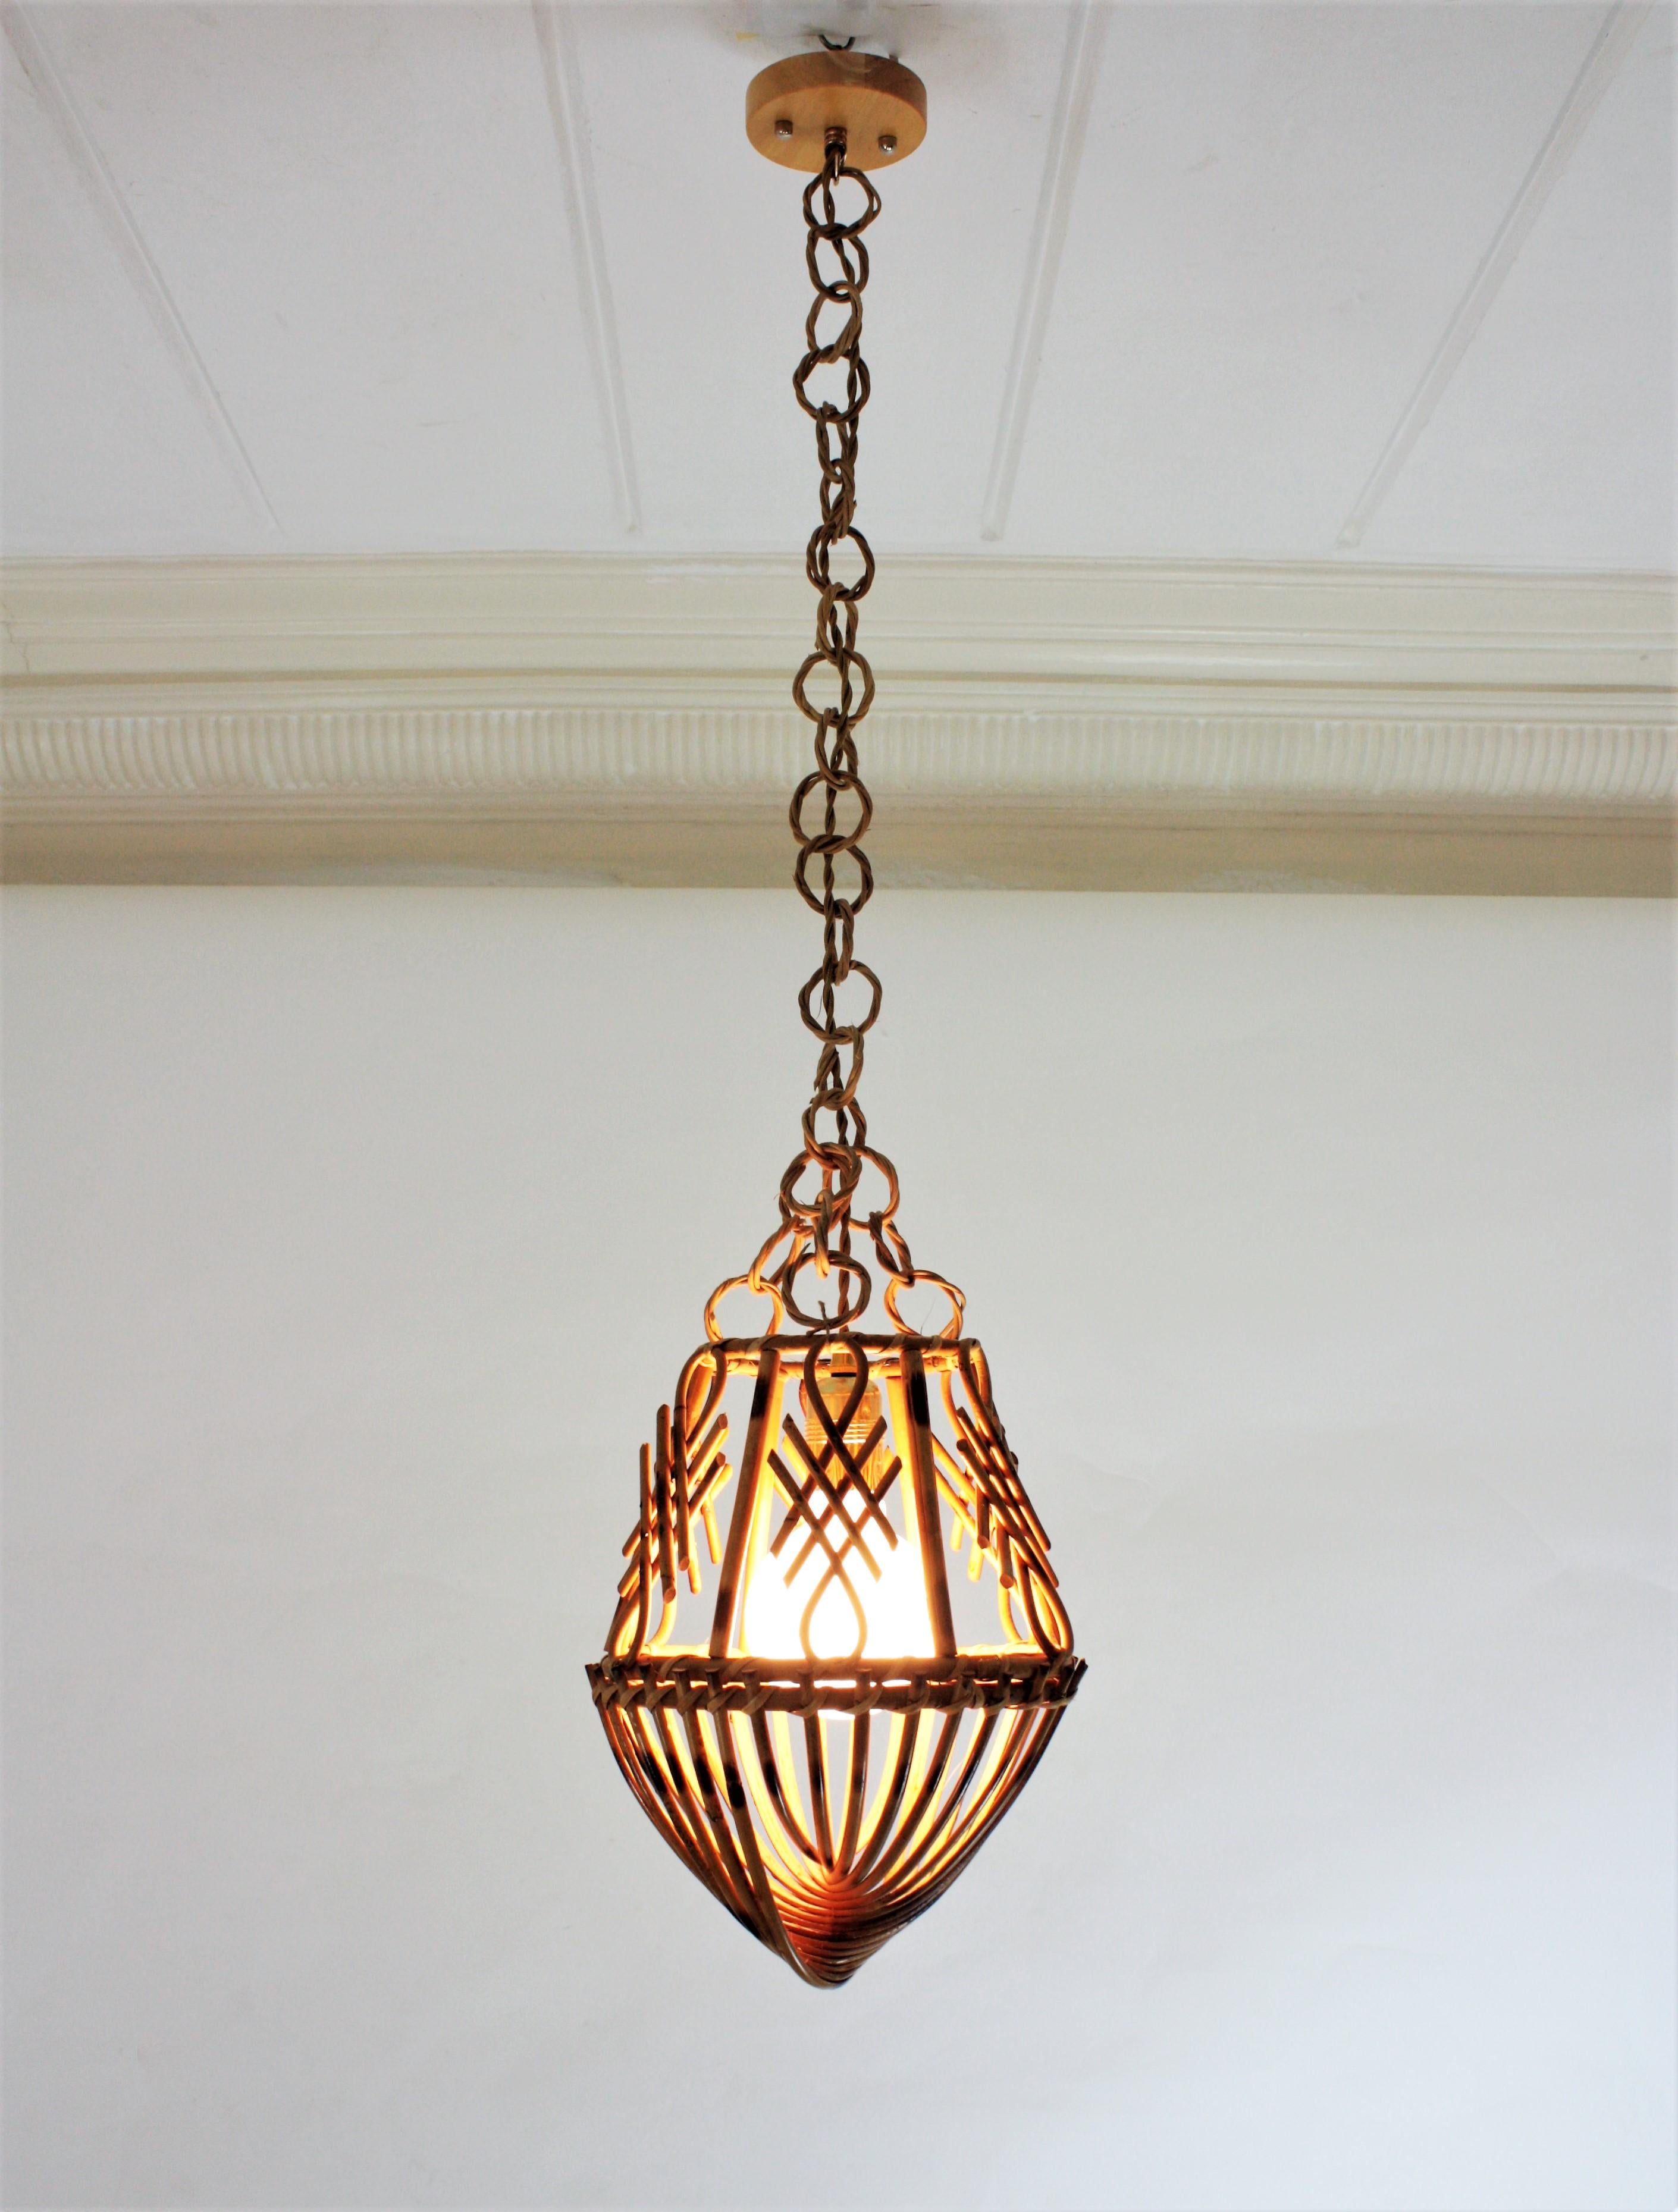 20th Century Rattan French Modernist Pendant Lamp or Lantern with Chinoiserie Accents